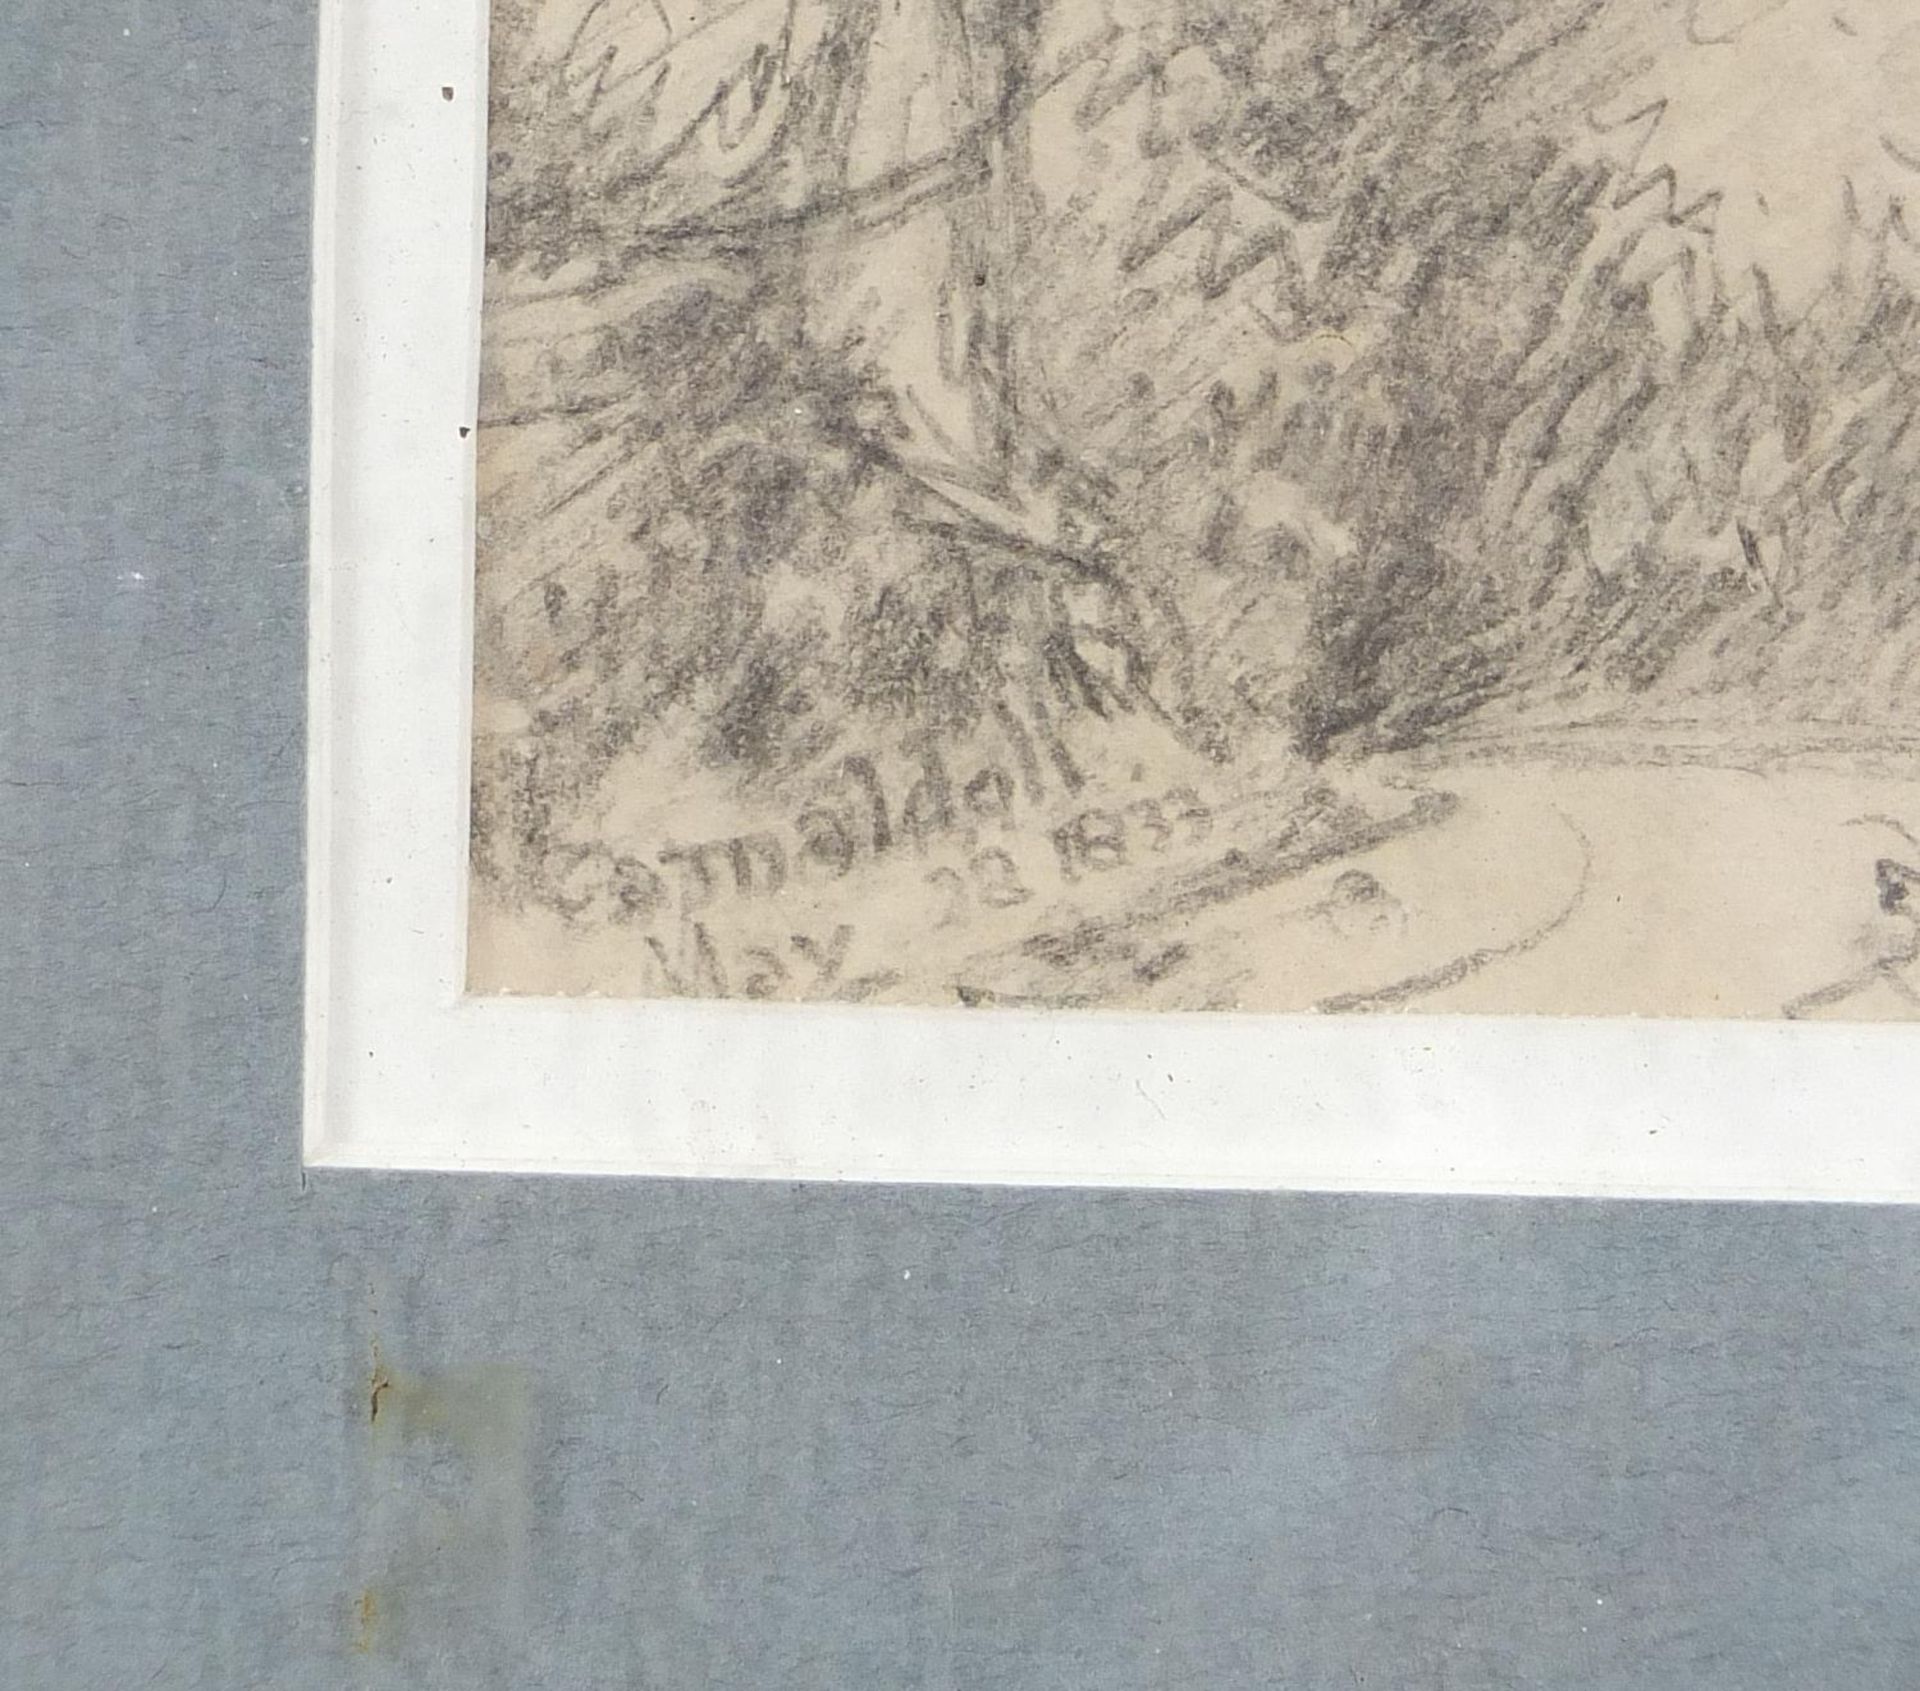 Lady Elizabeth Percy - Tuscan landscape, 19th century pencil sketch, Agnew Gallery label and details - Image 3 of 5